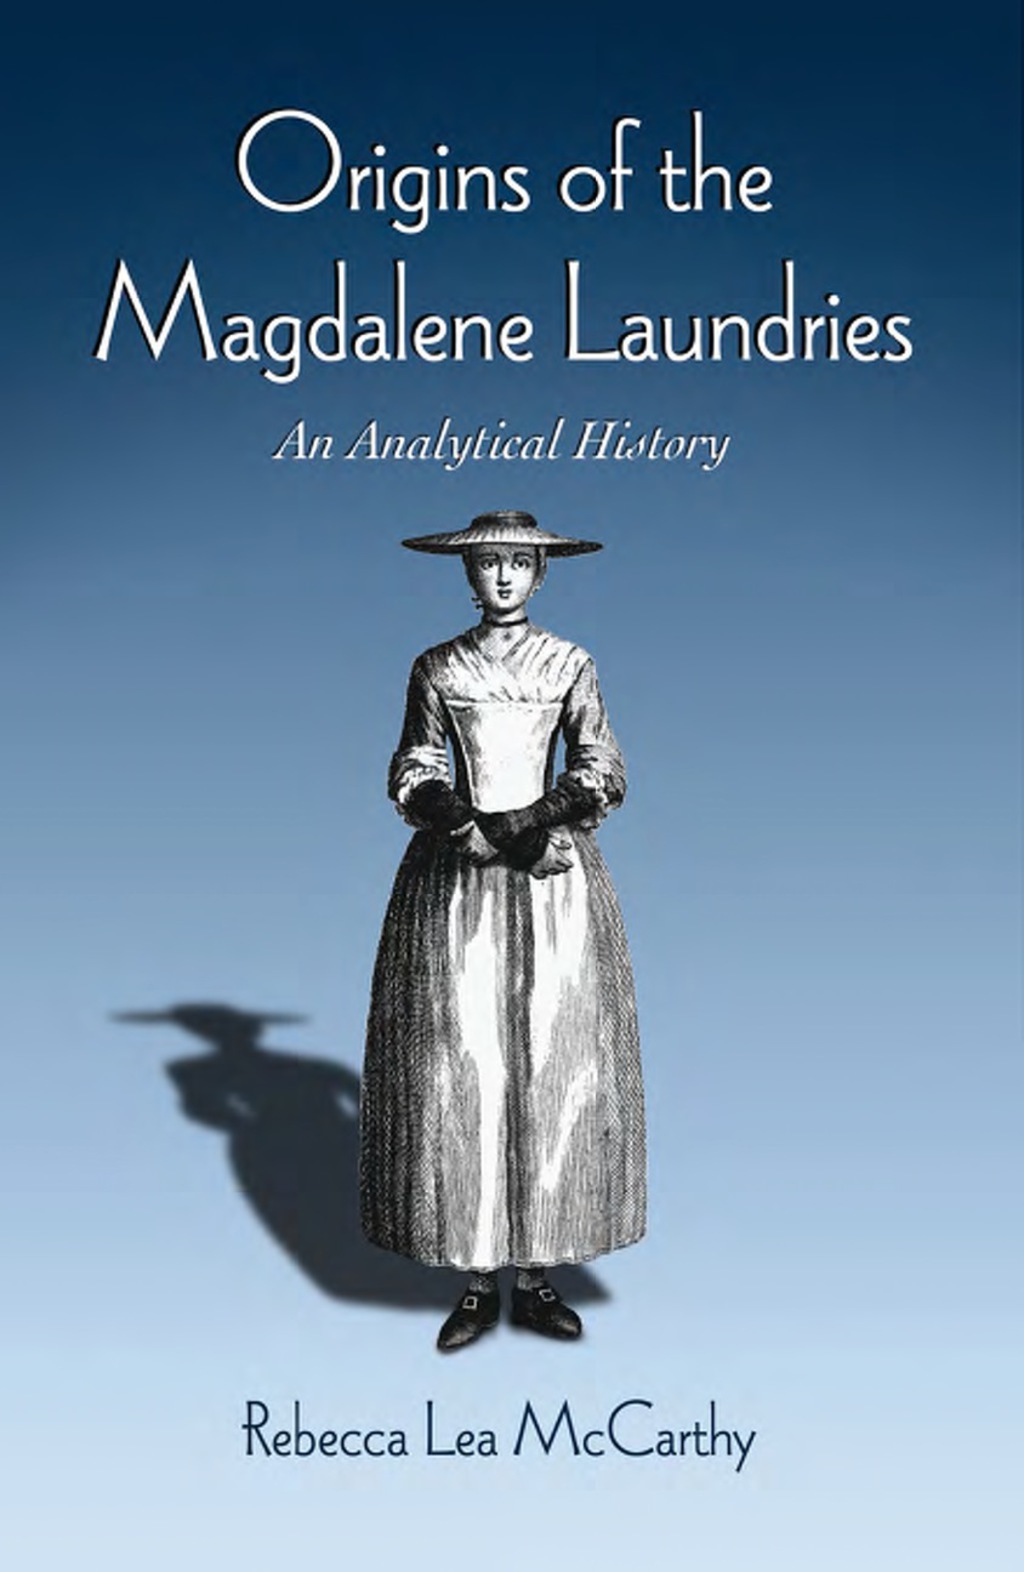 Origins of the Magdalene Laundries: An Analytical History (eBook) - Rebecca Lea McCarthy,